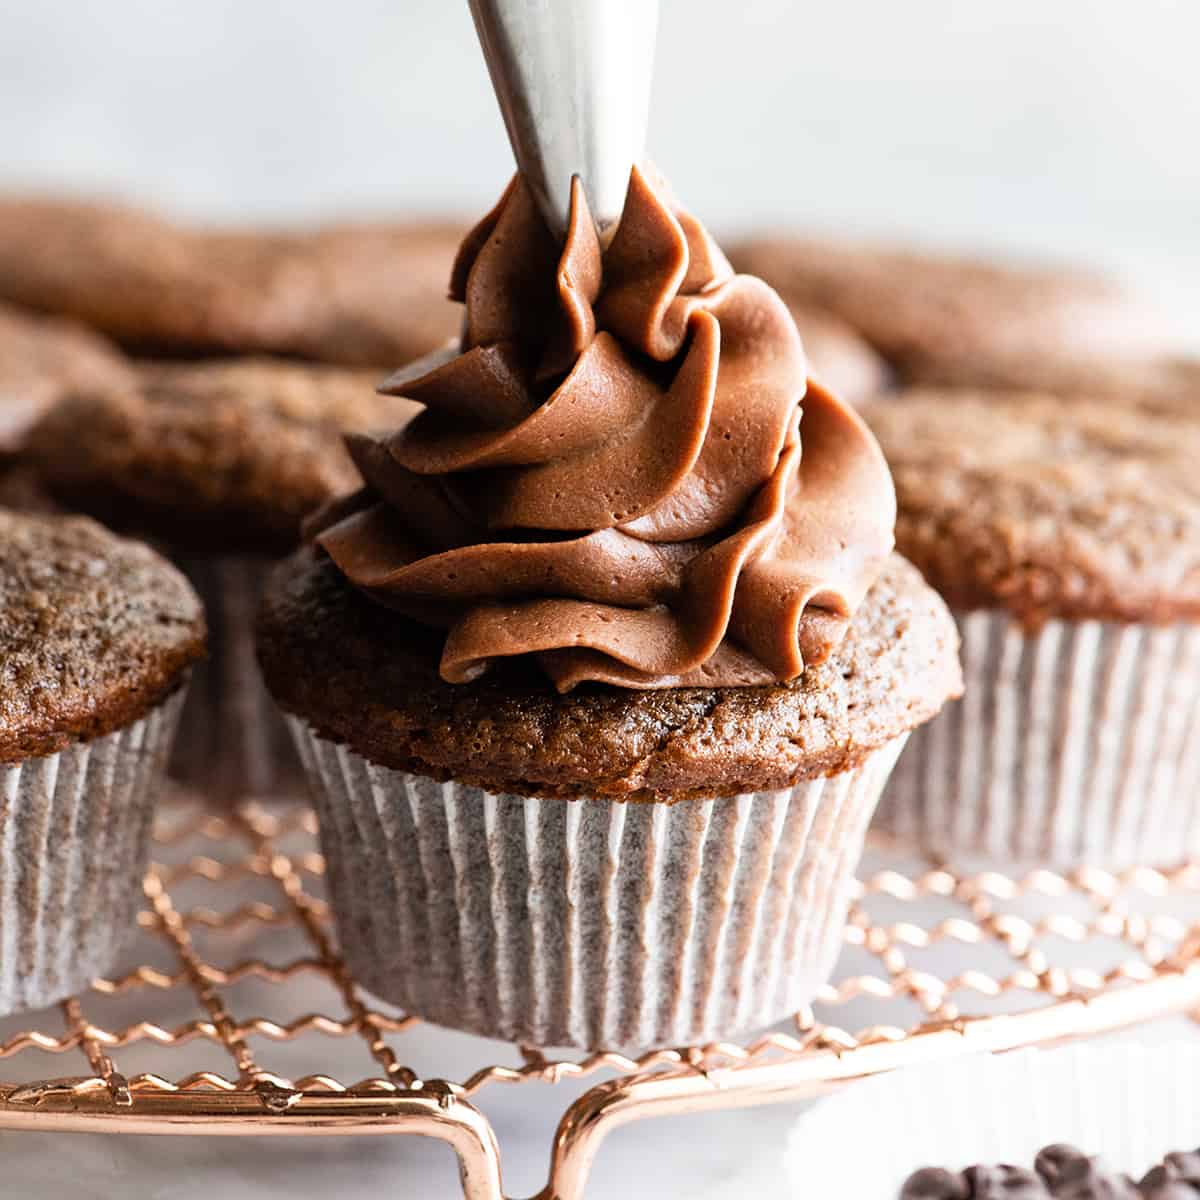 front photo showing frosting being piped onto a chocolate cupcake